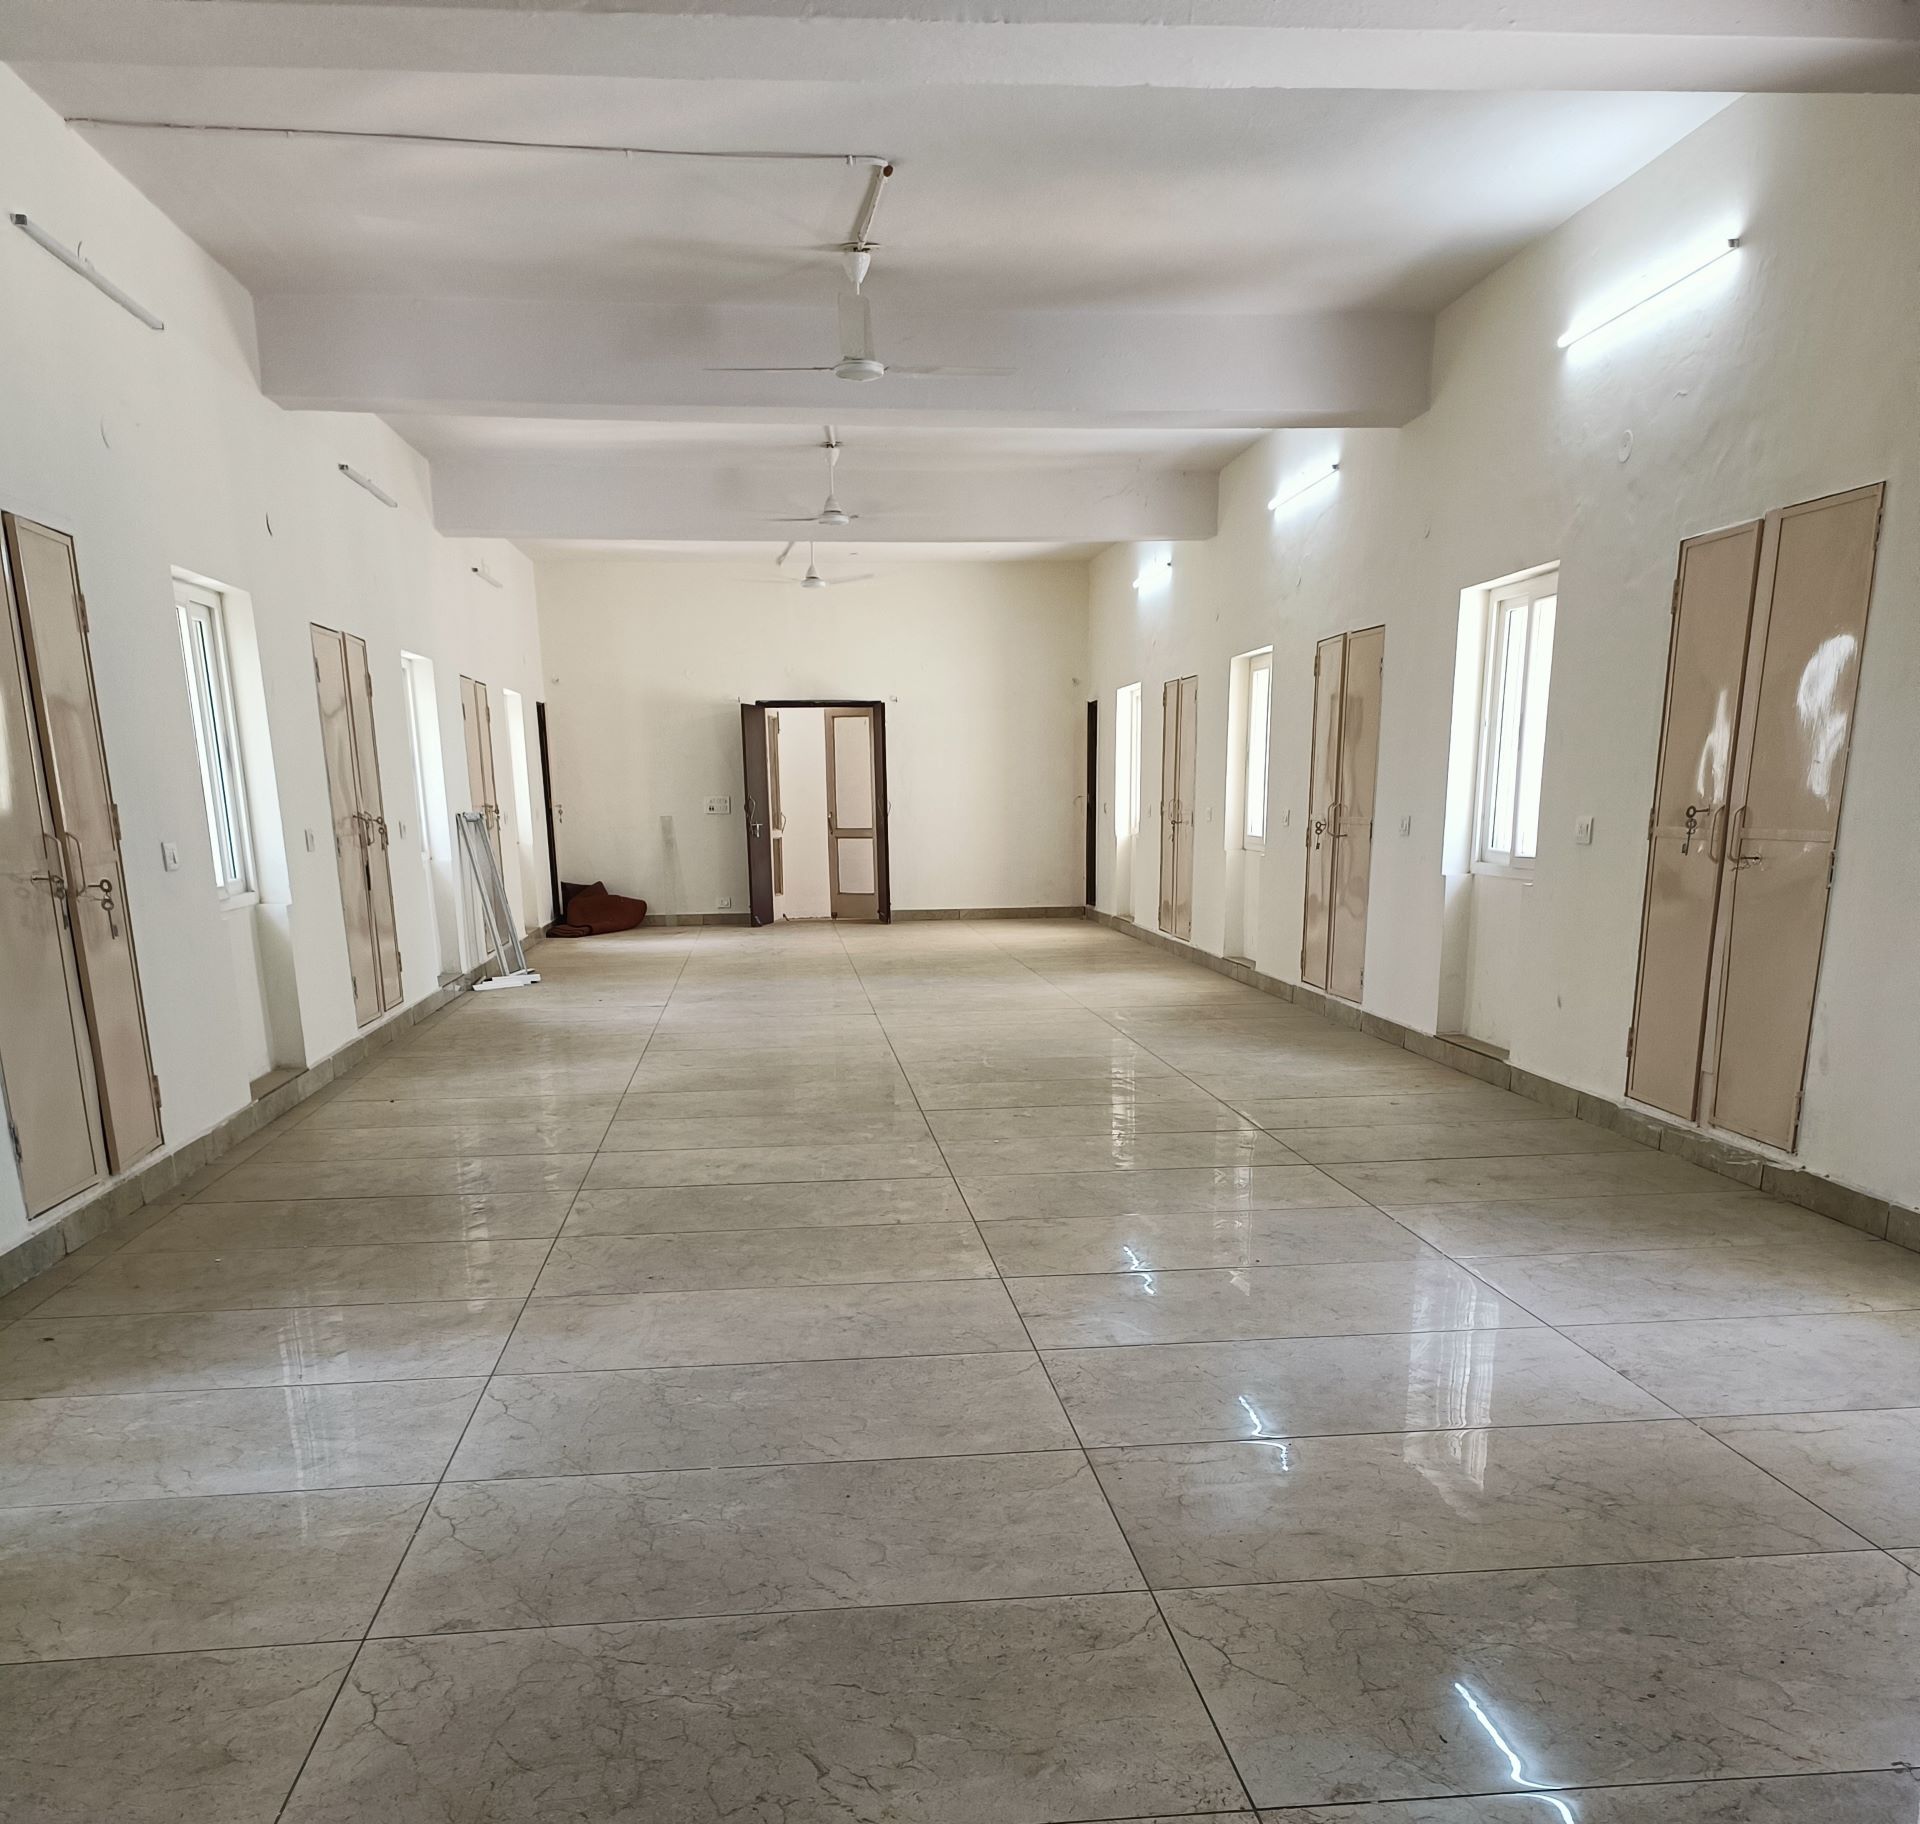 STRUCTURAL REPAIRS AND RENOVATION OF RIDGEWOOD HOSTEL AT ARMY PUBLIC SCHOOL